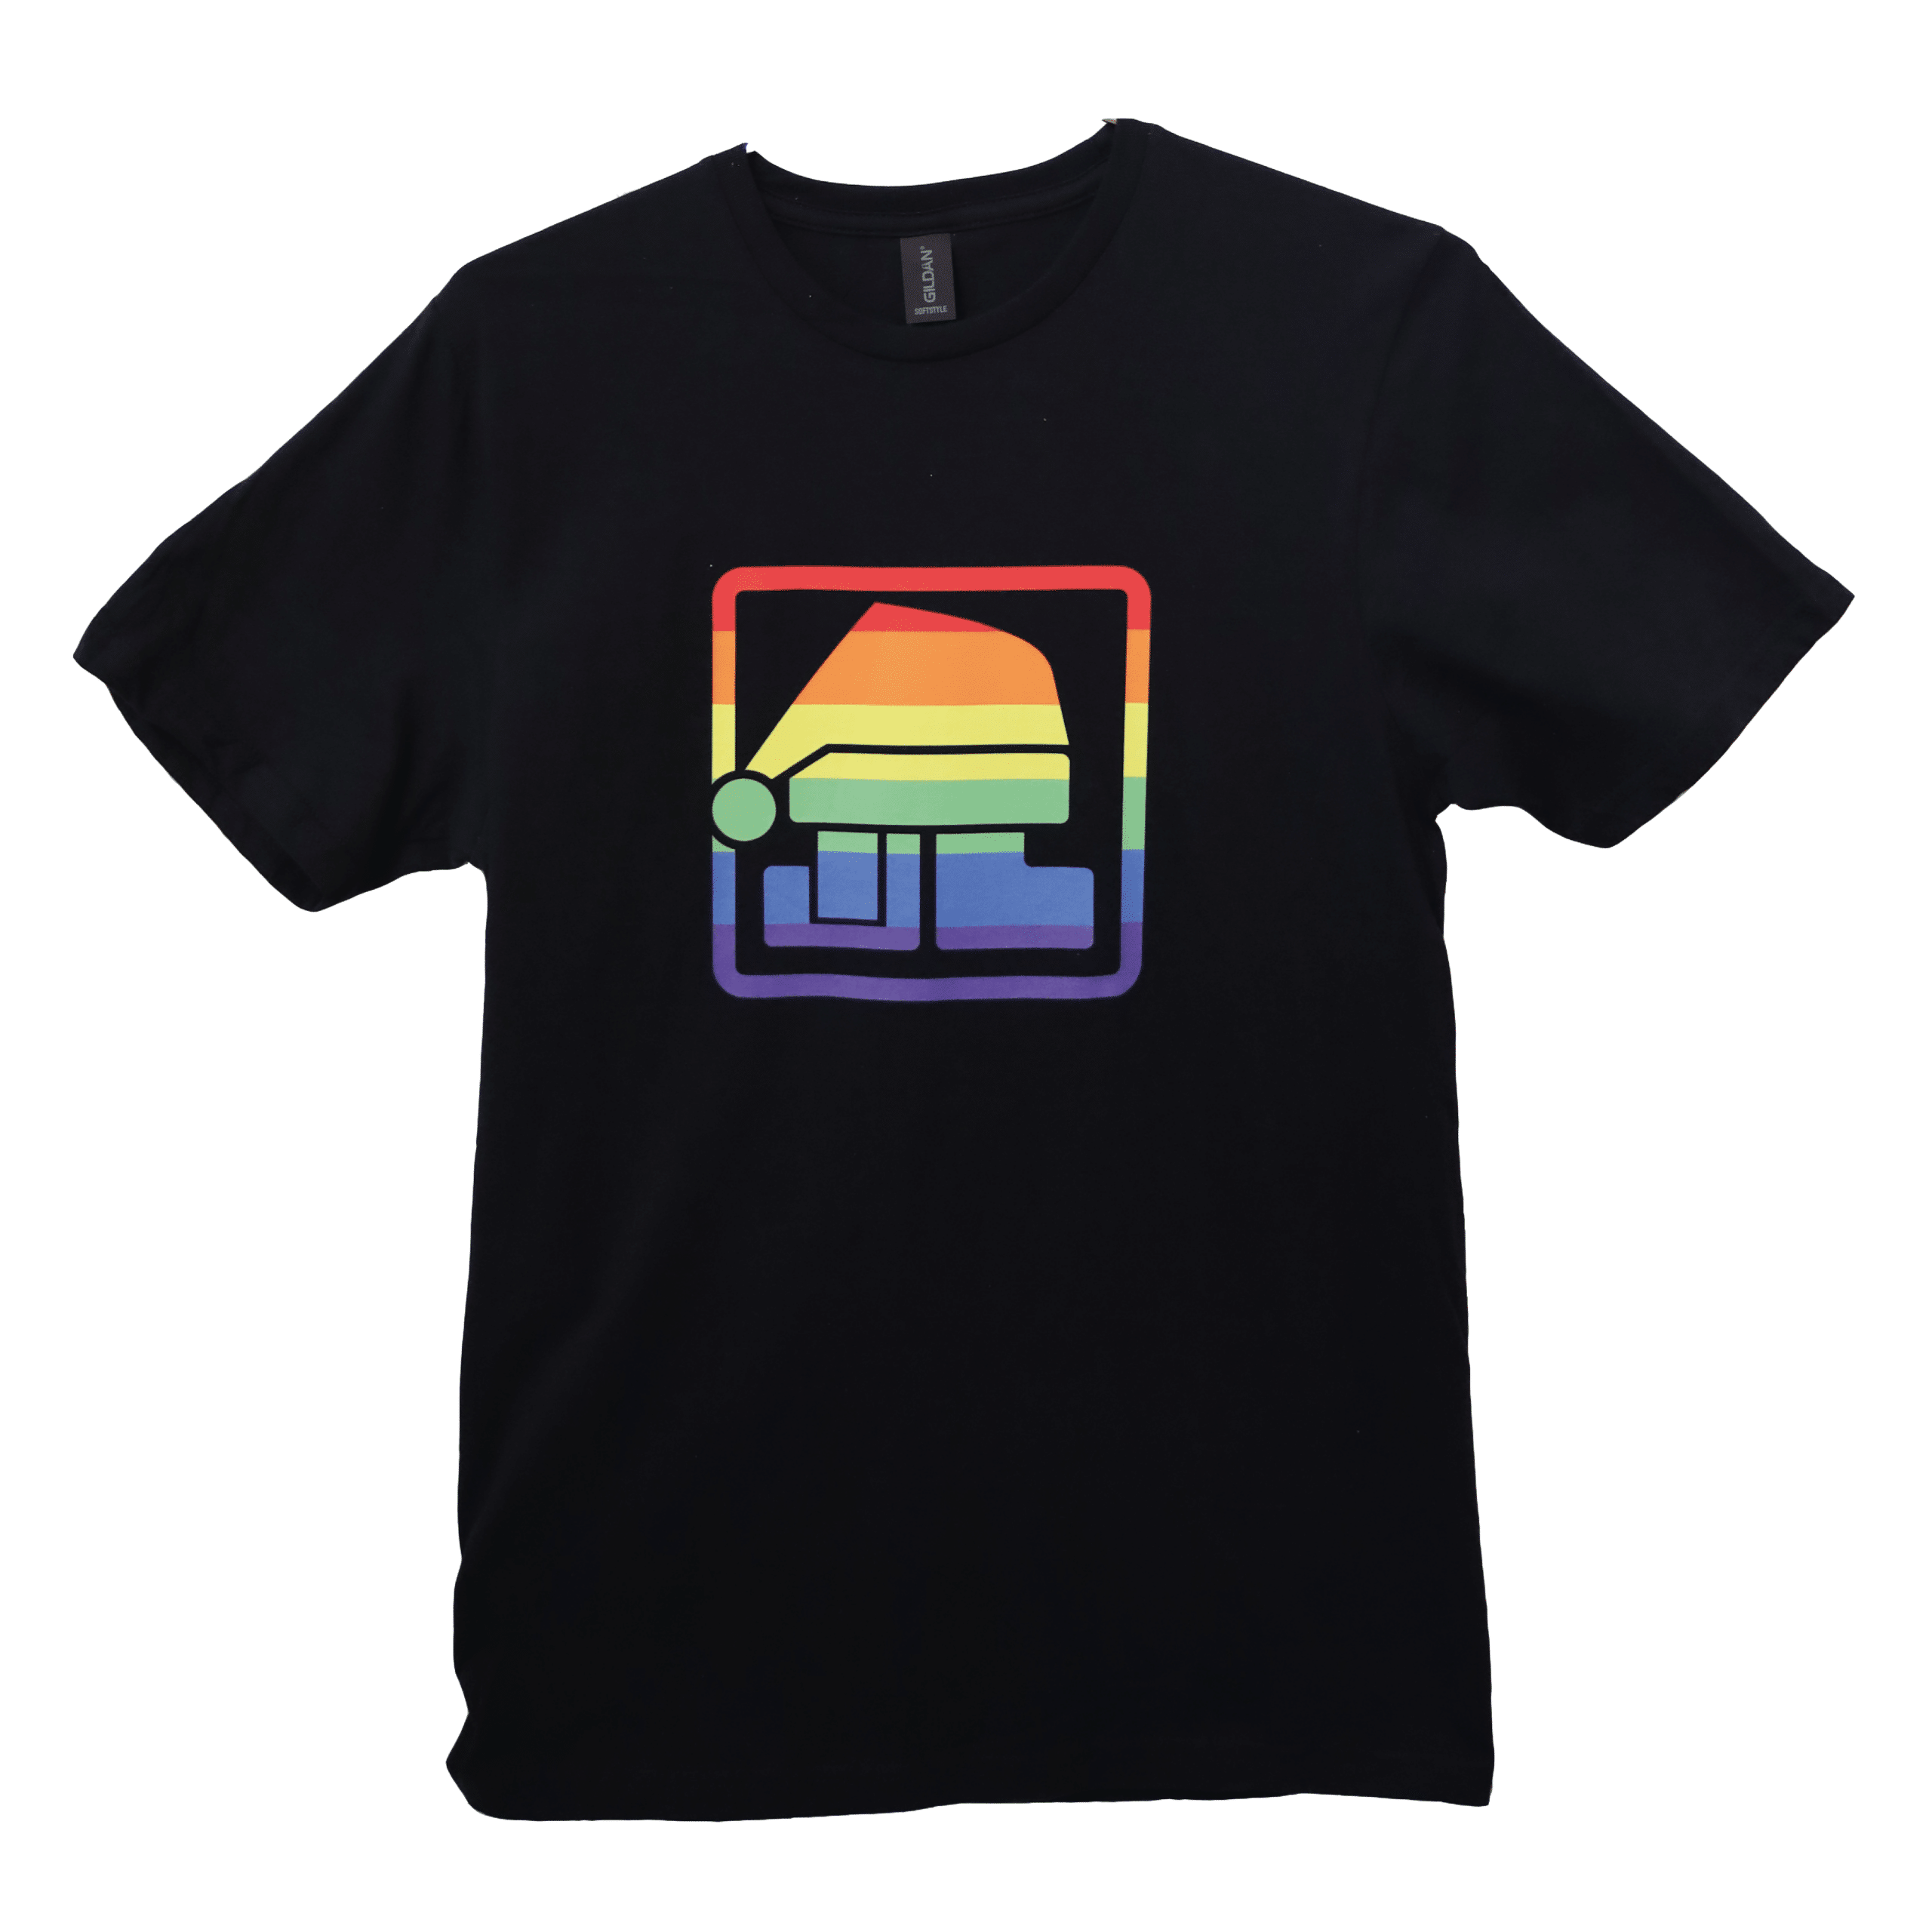 Featured image for “T-shirt Pride”